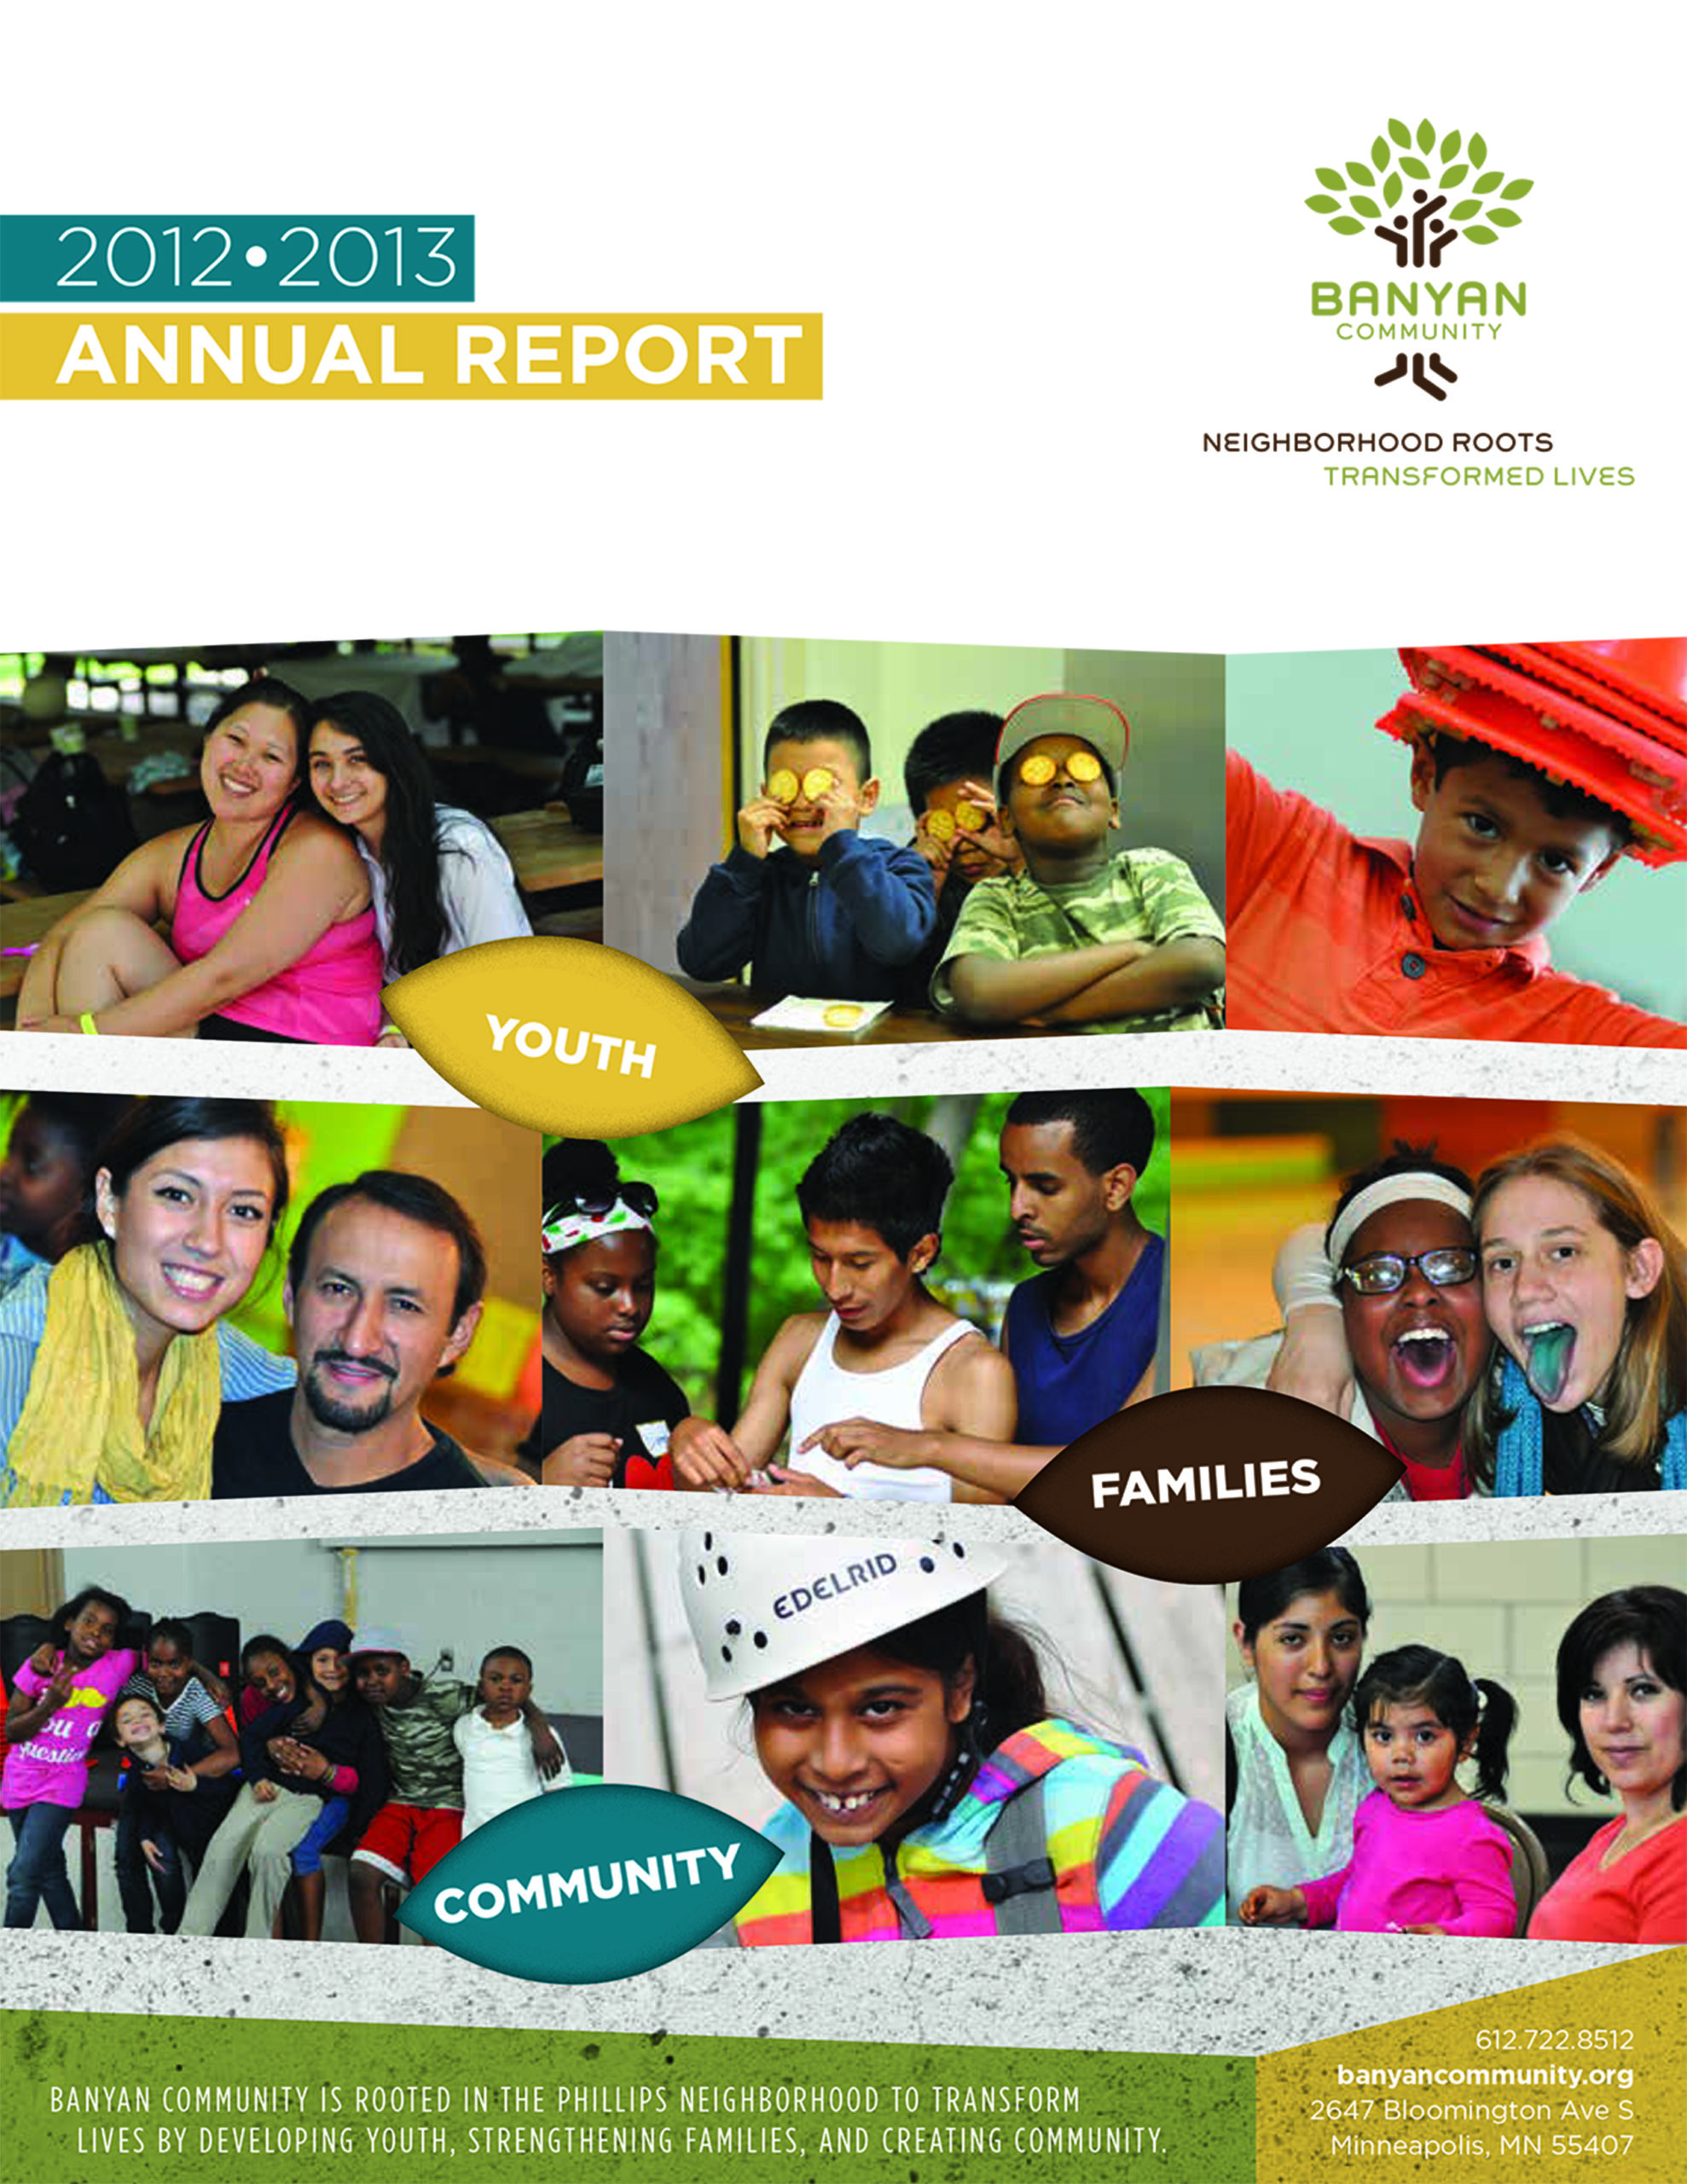 Banyan Community's 2012-2013 annual report cover